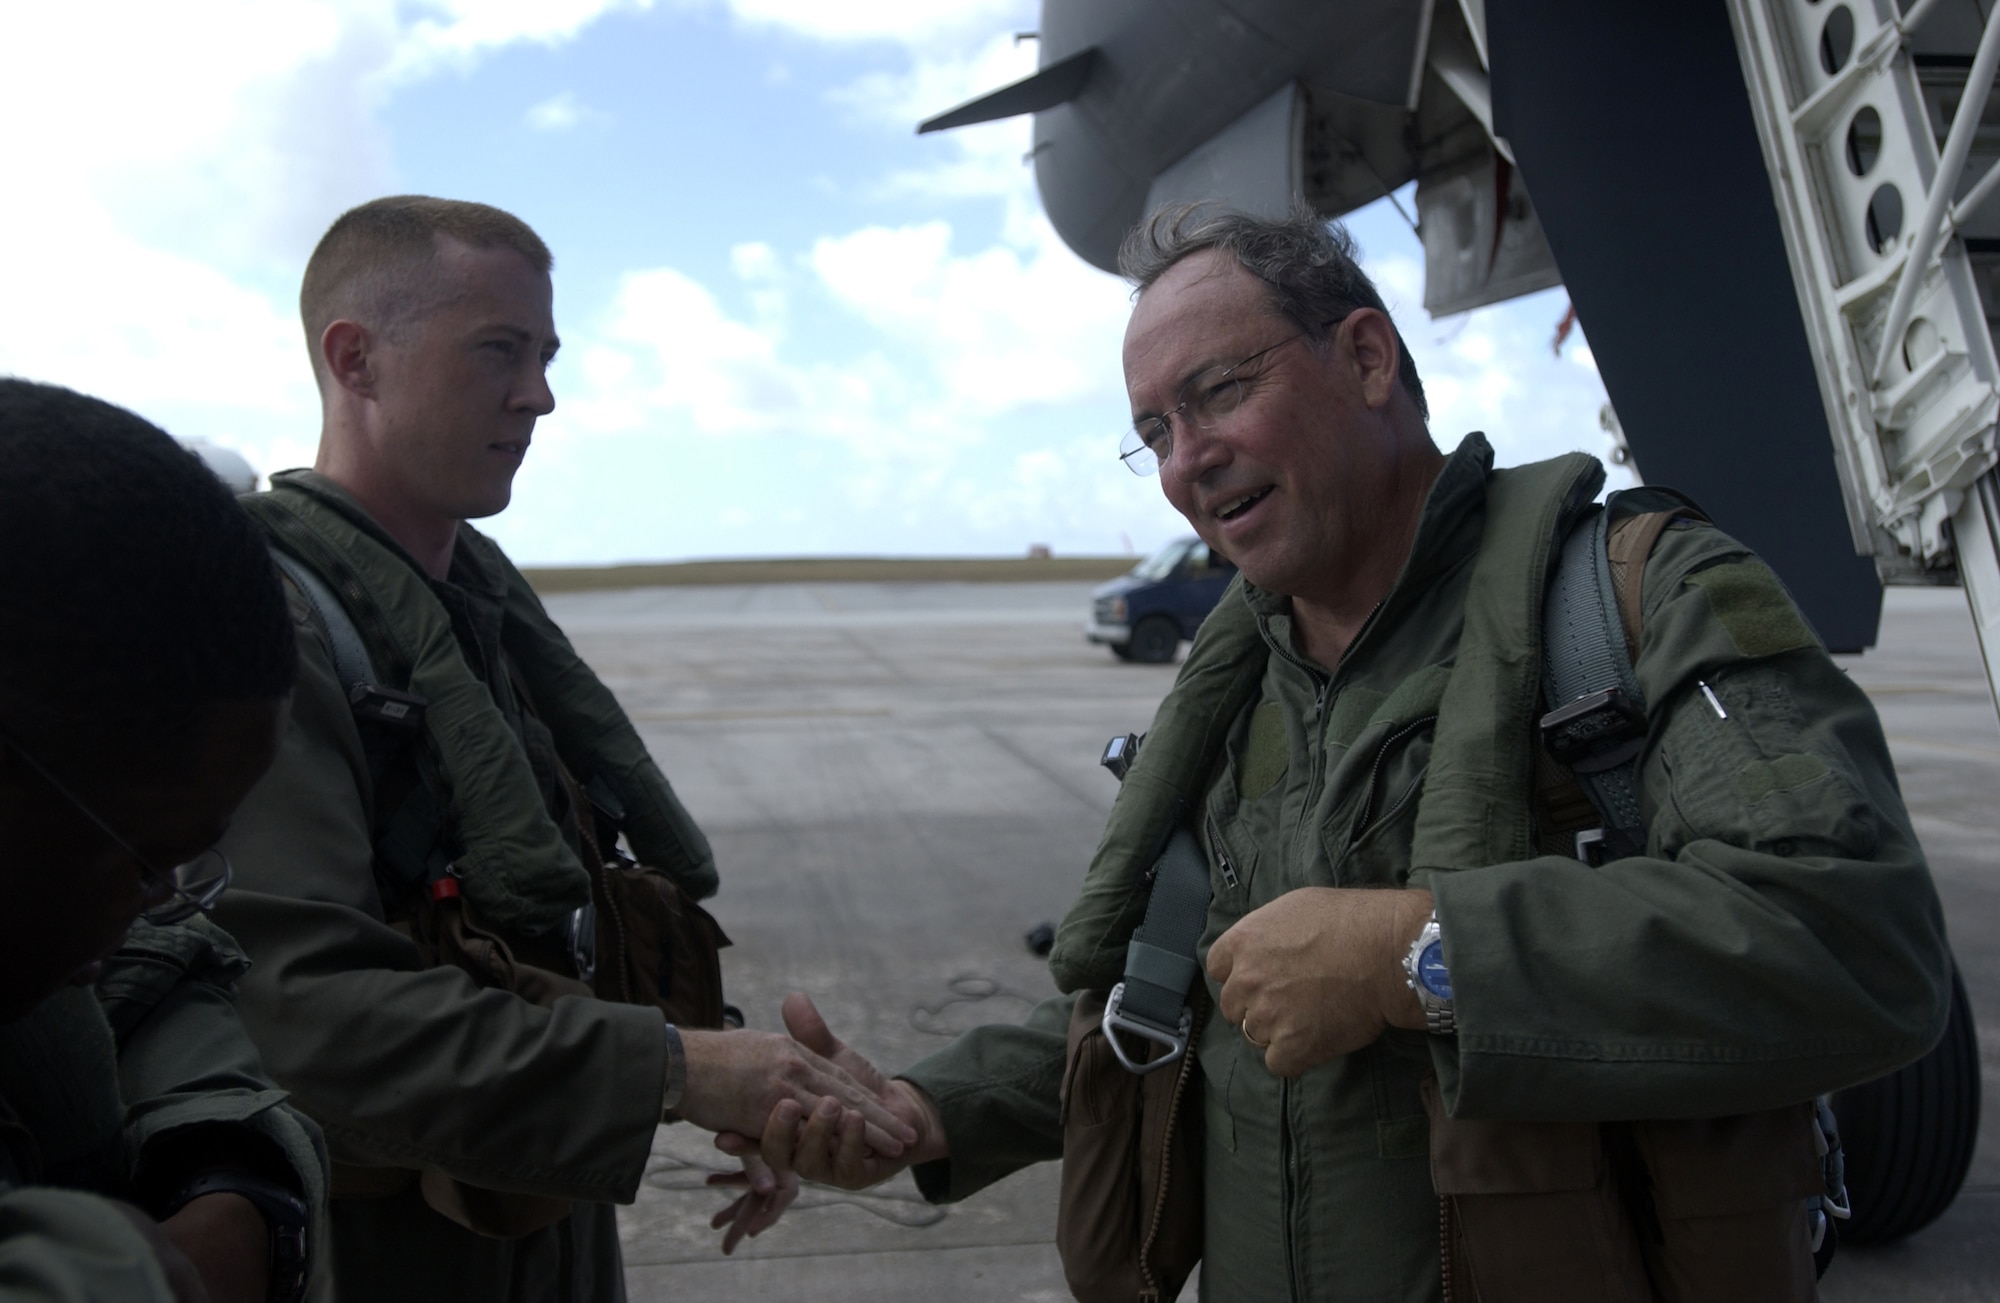 ANDERSEN AIR FORCE BASE, Guam - Lt. Gen. David Deptula (right), formerly the Kenny Warfighting Headquarters commander, last visited Andersen on April 24, 2006. The general is the guest speaker at the Air Force 60th Anniversary Ball which will be held Saturday at Hilton Guam Resort and Spa. (U.S. Air Force Photo)